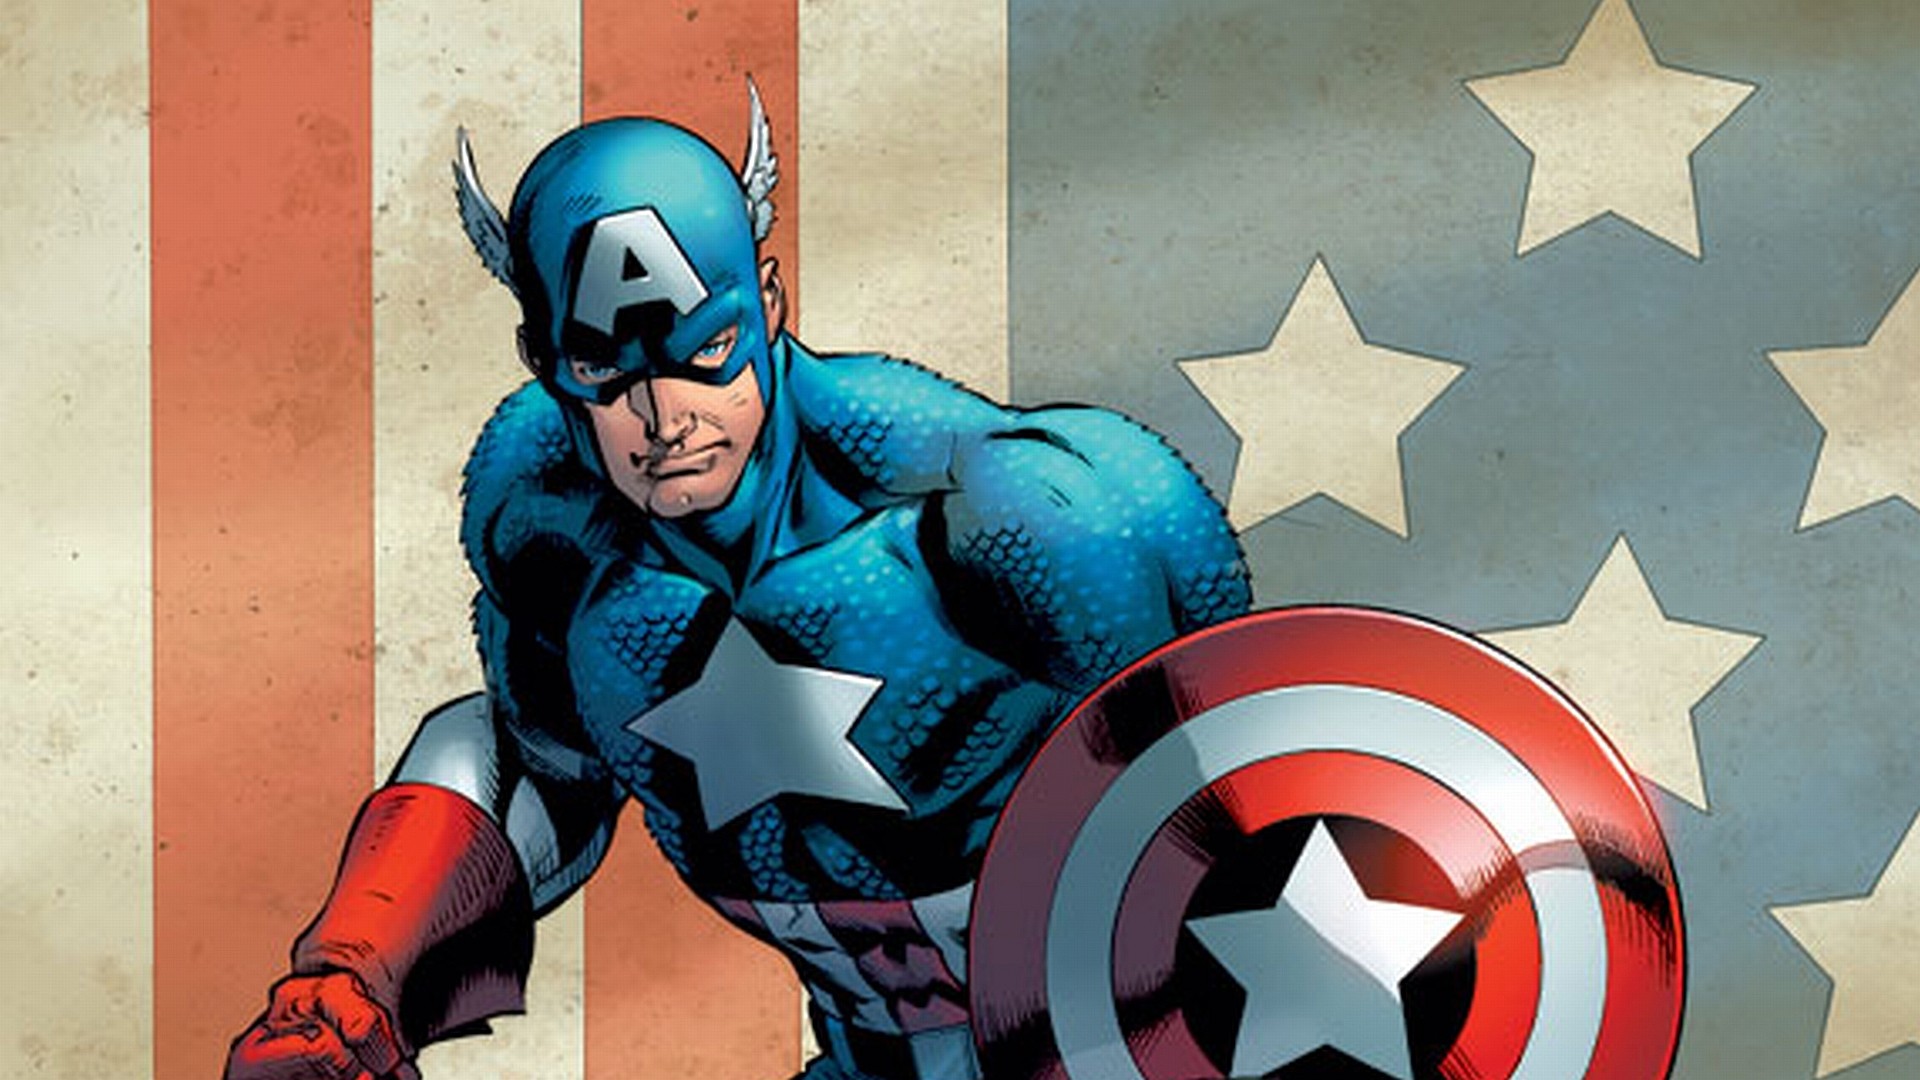 1920x1080 249 Captain America HD Wallpapers | Backgrounds - Wallpaper Abyss - Page 4